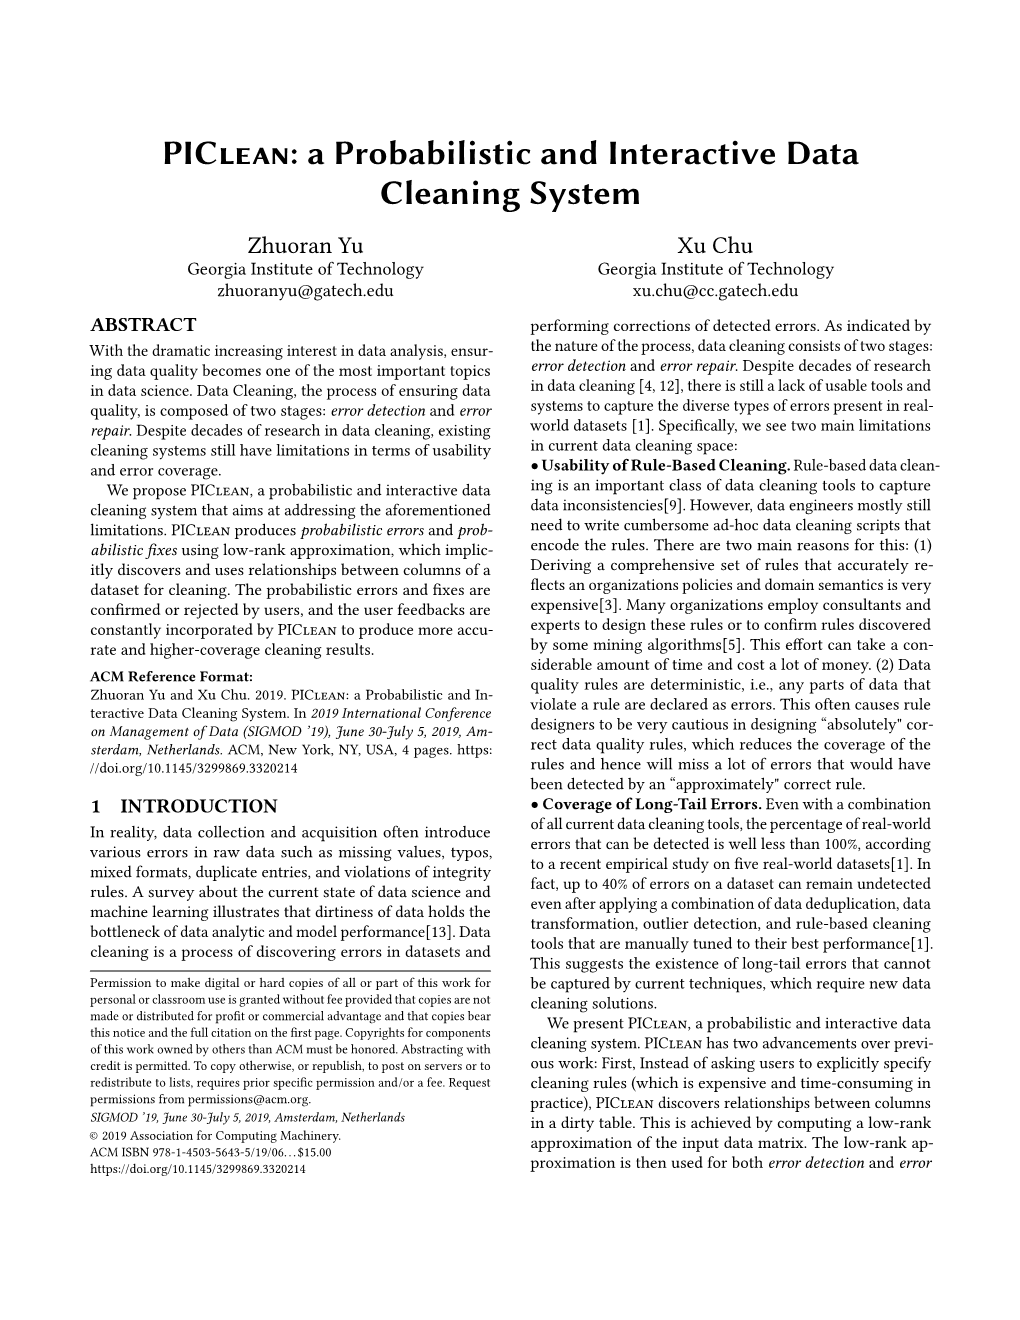 Piclean: a Probabilistic and Interactive Data Cleaning System